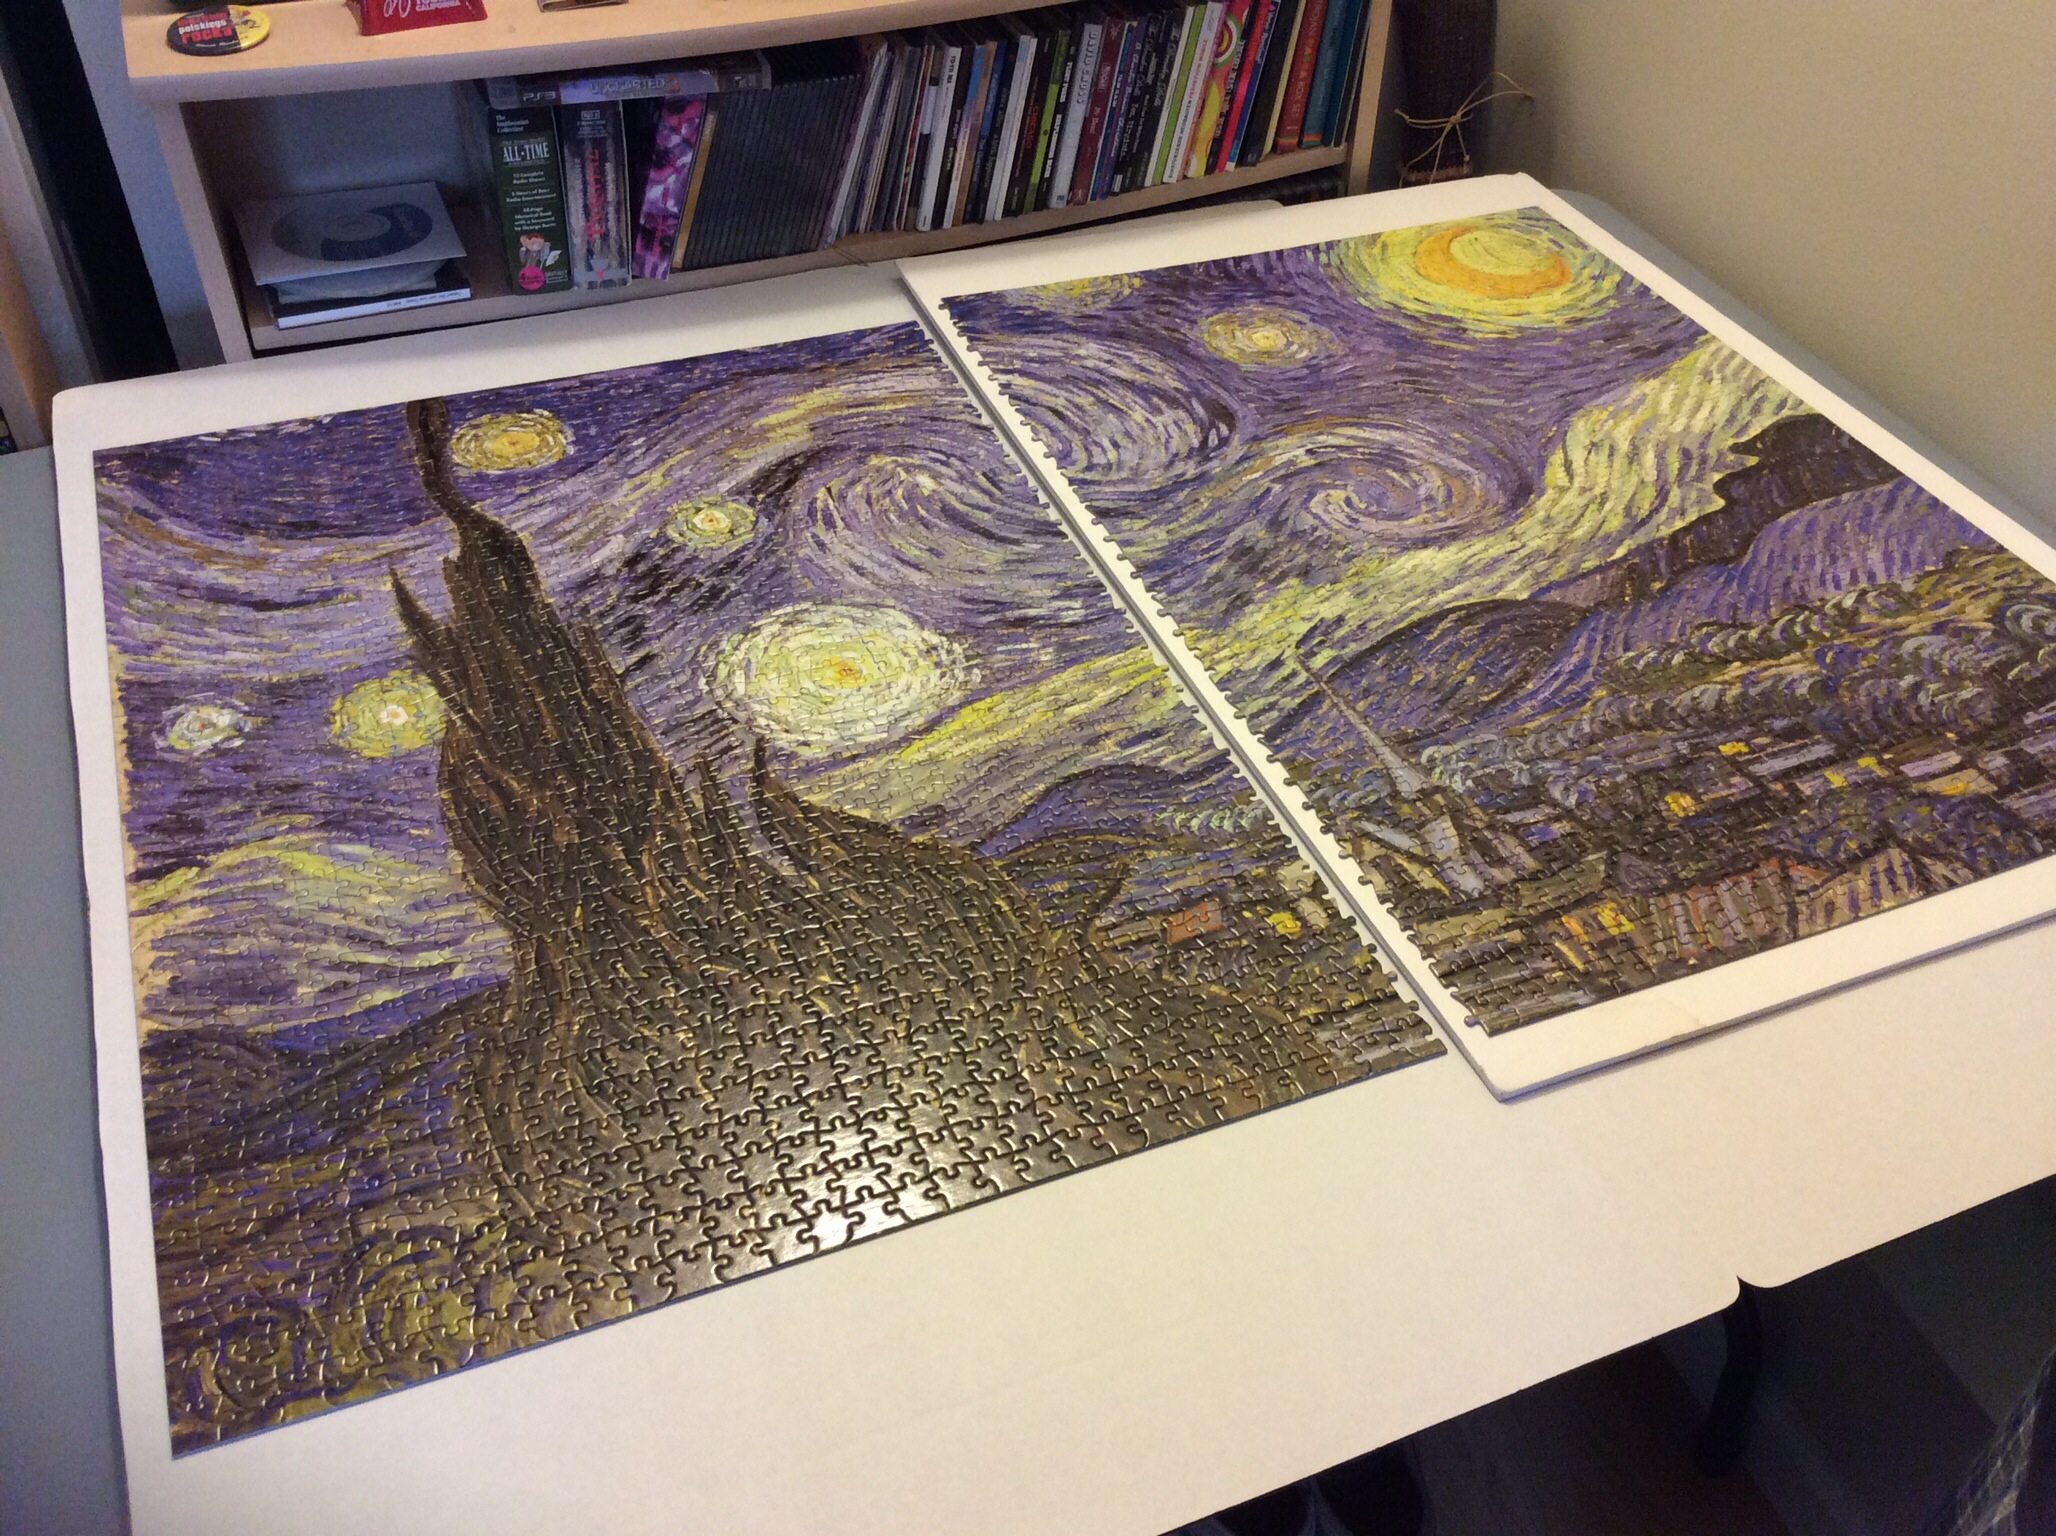 The The Starry Night Puzzle